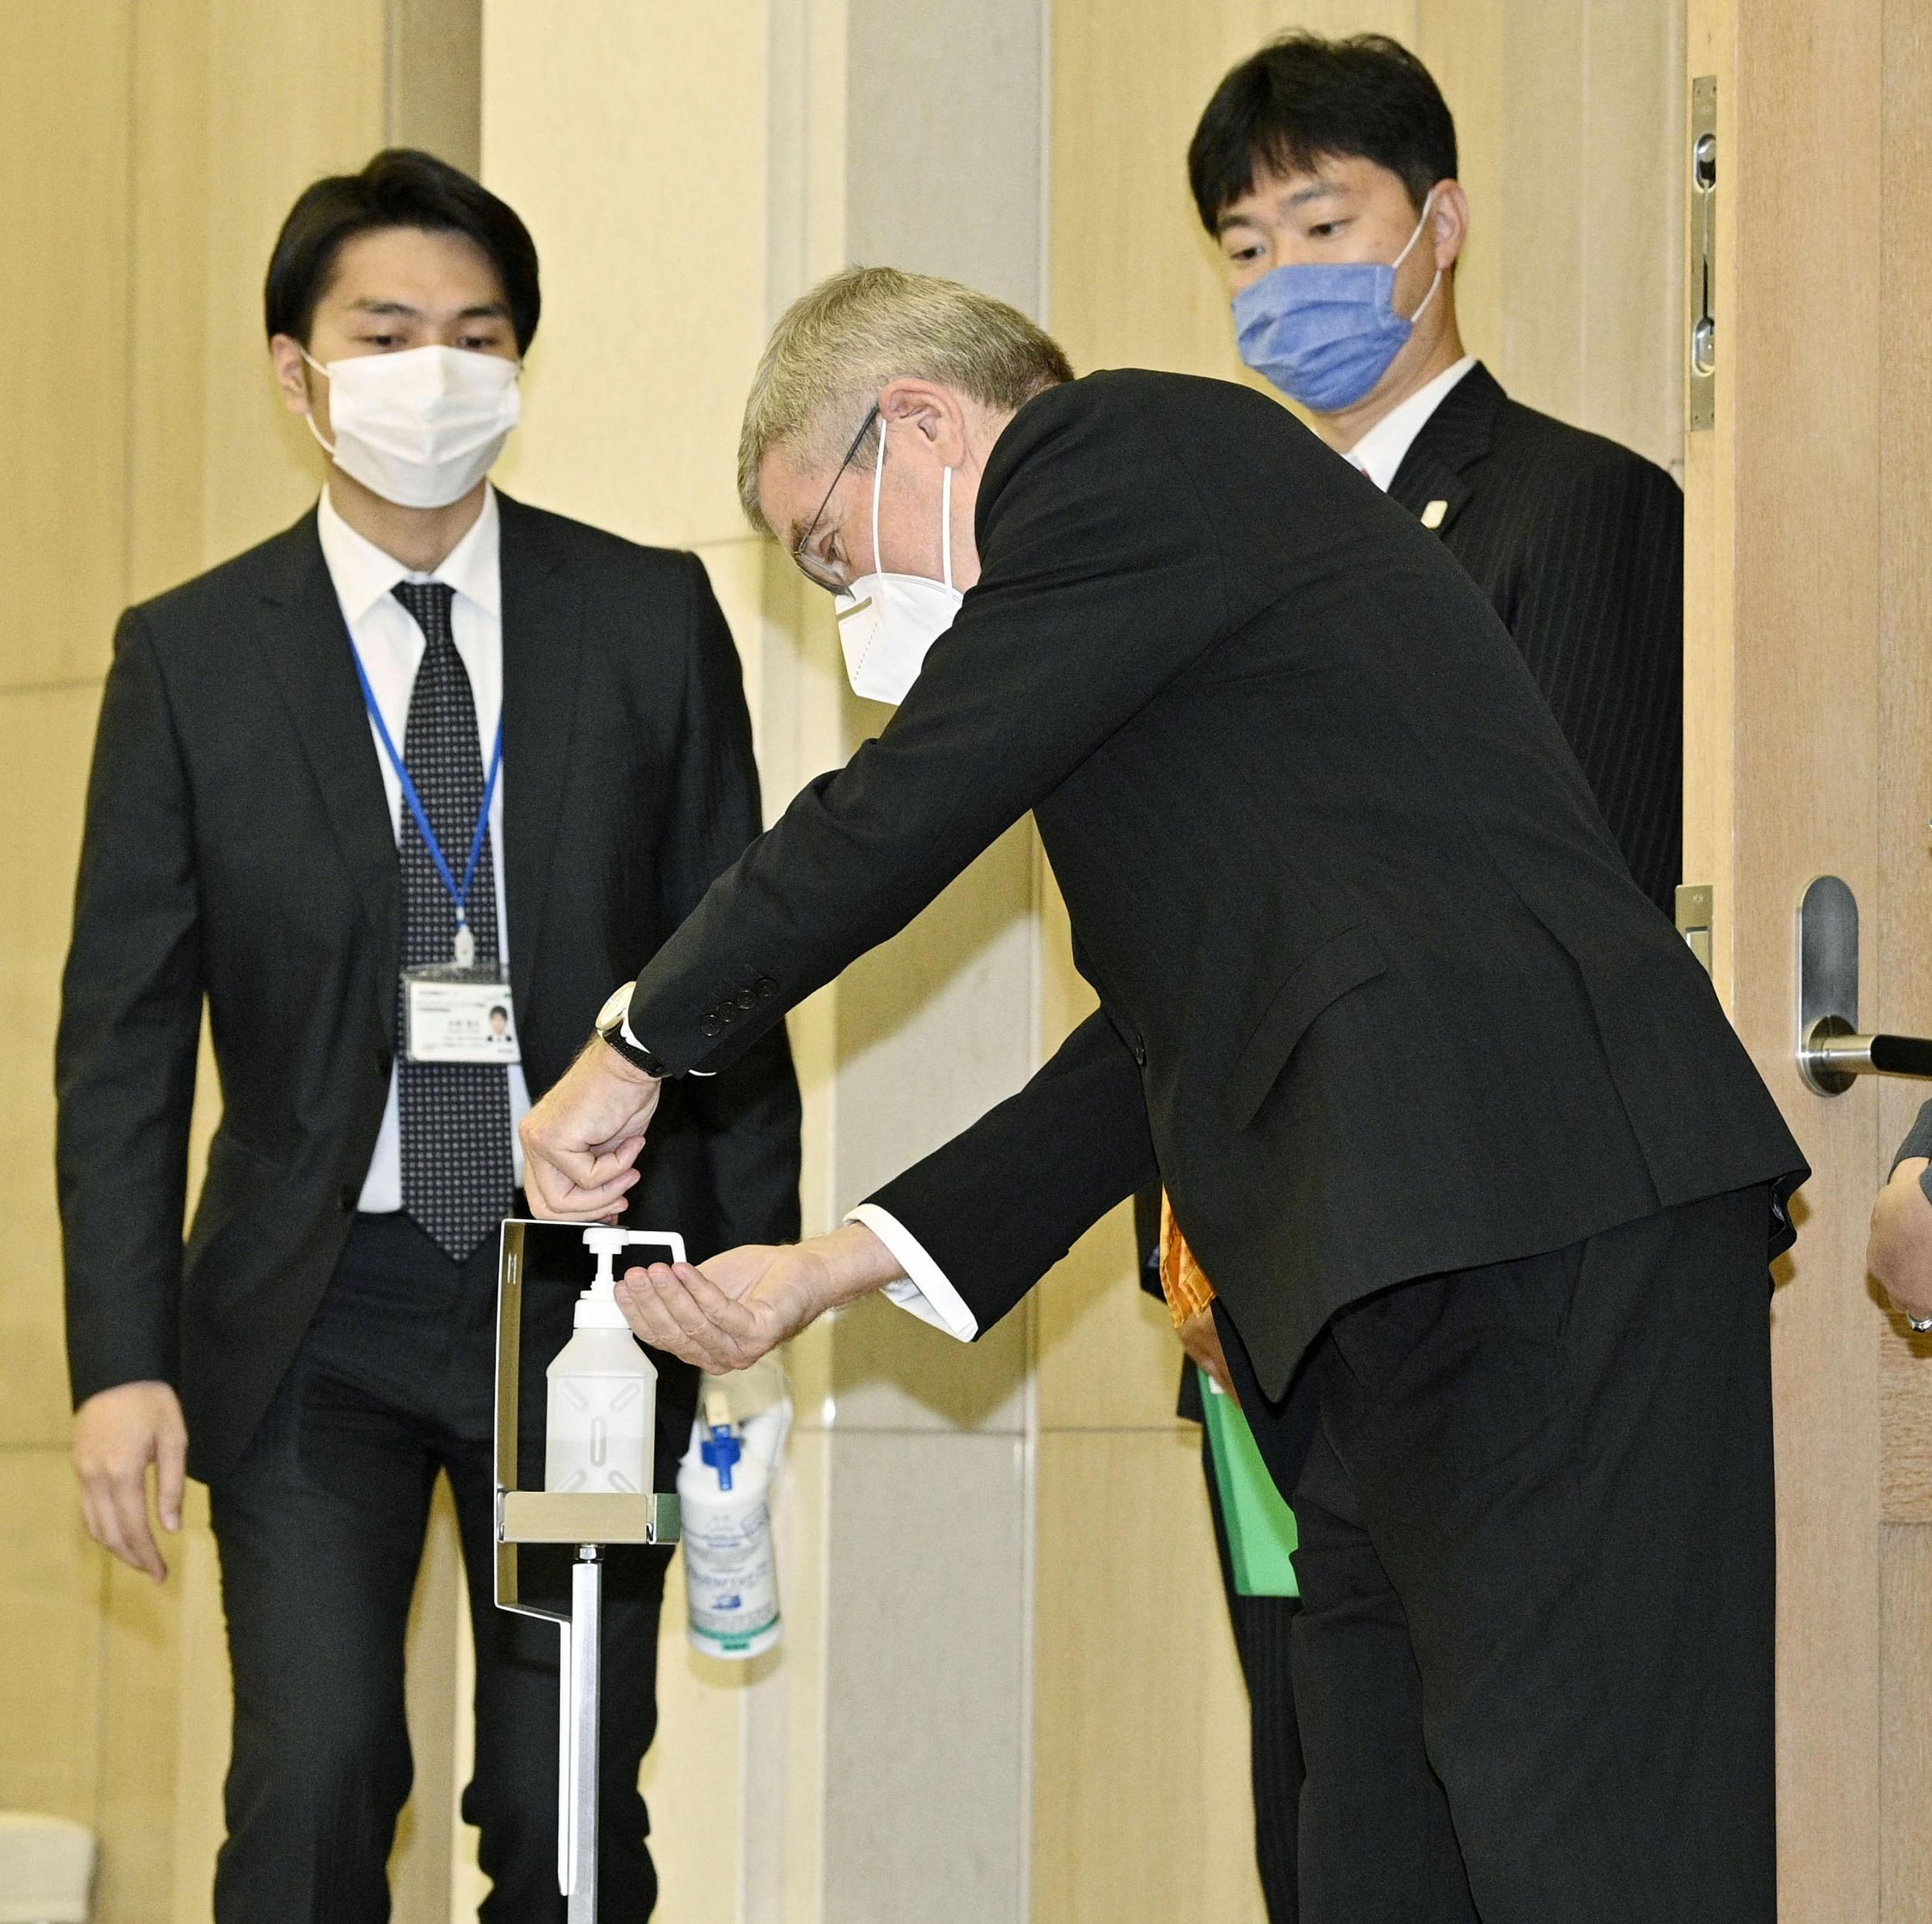 International Olympic Committee President Bach's visit to Japan ends Japan emphasizes its efforts to "realize the hosting" of the Tokyo Olympics